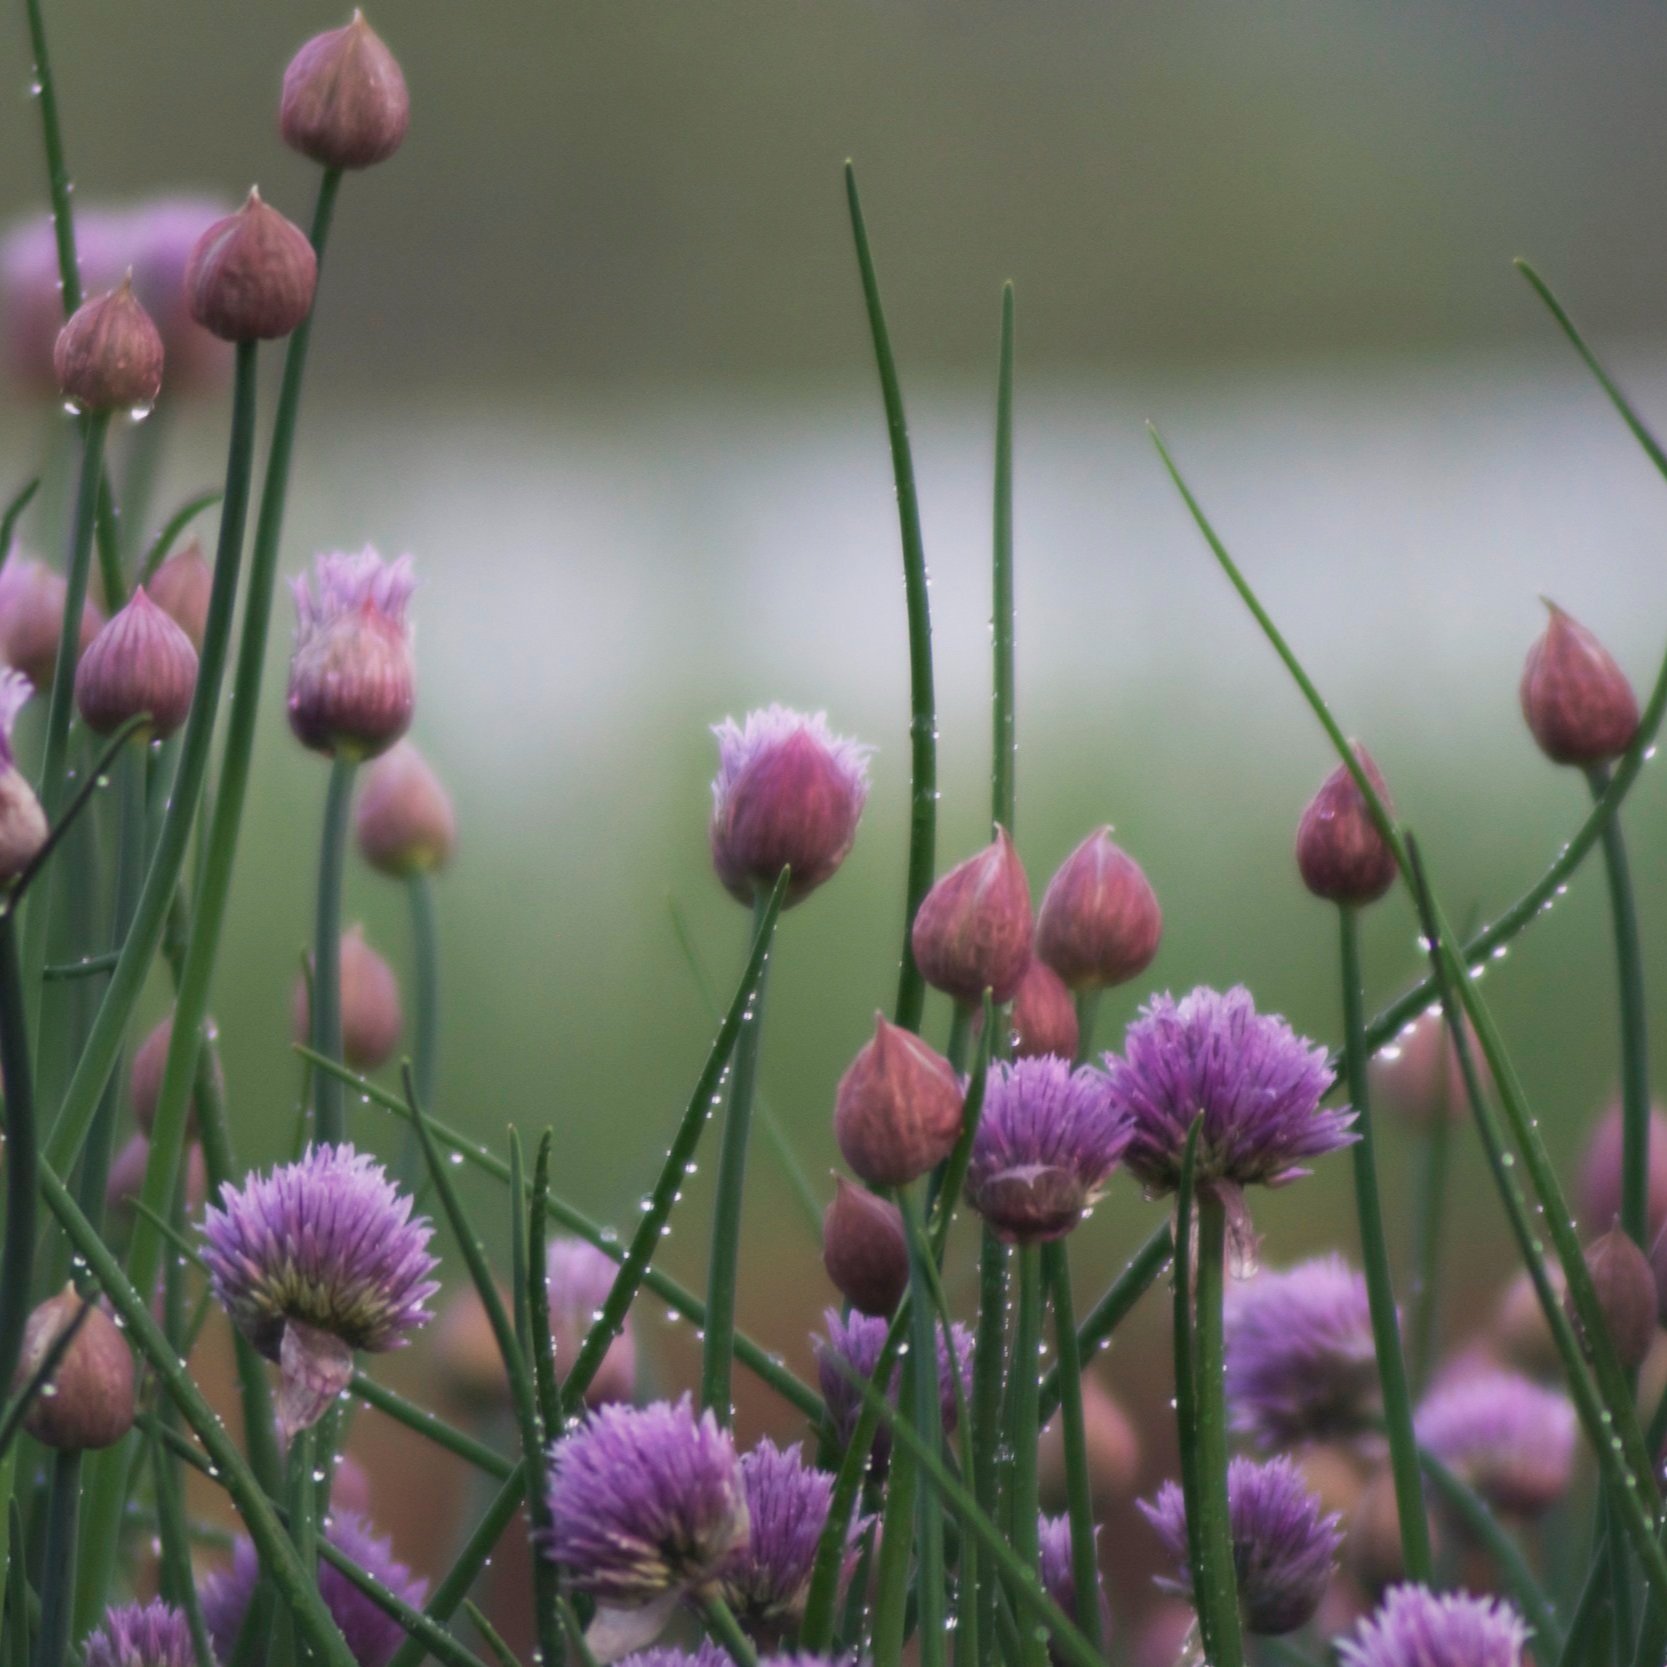 chive+blossoms+and+rain+drops+1+%282%29.jpg